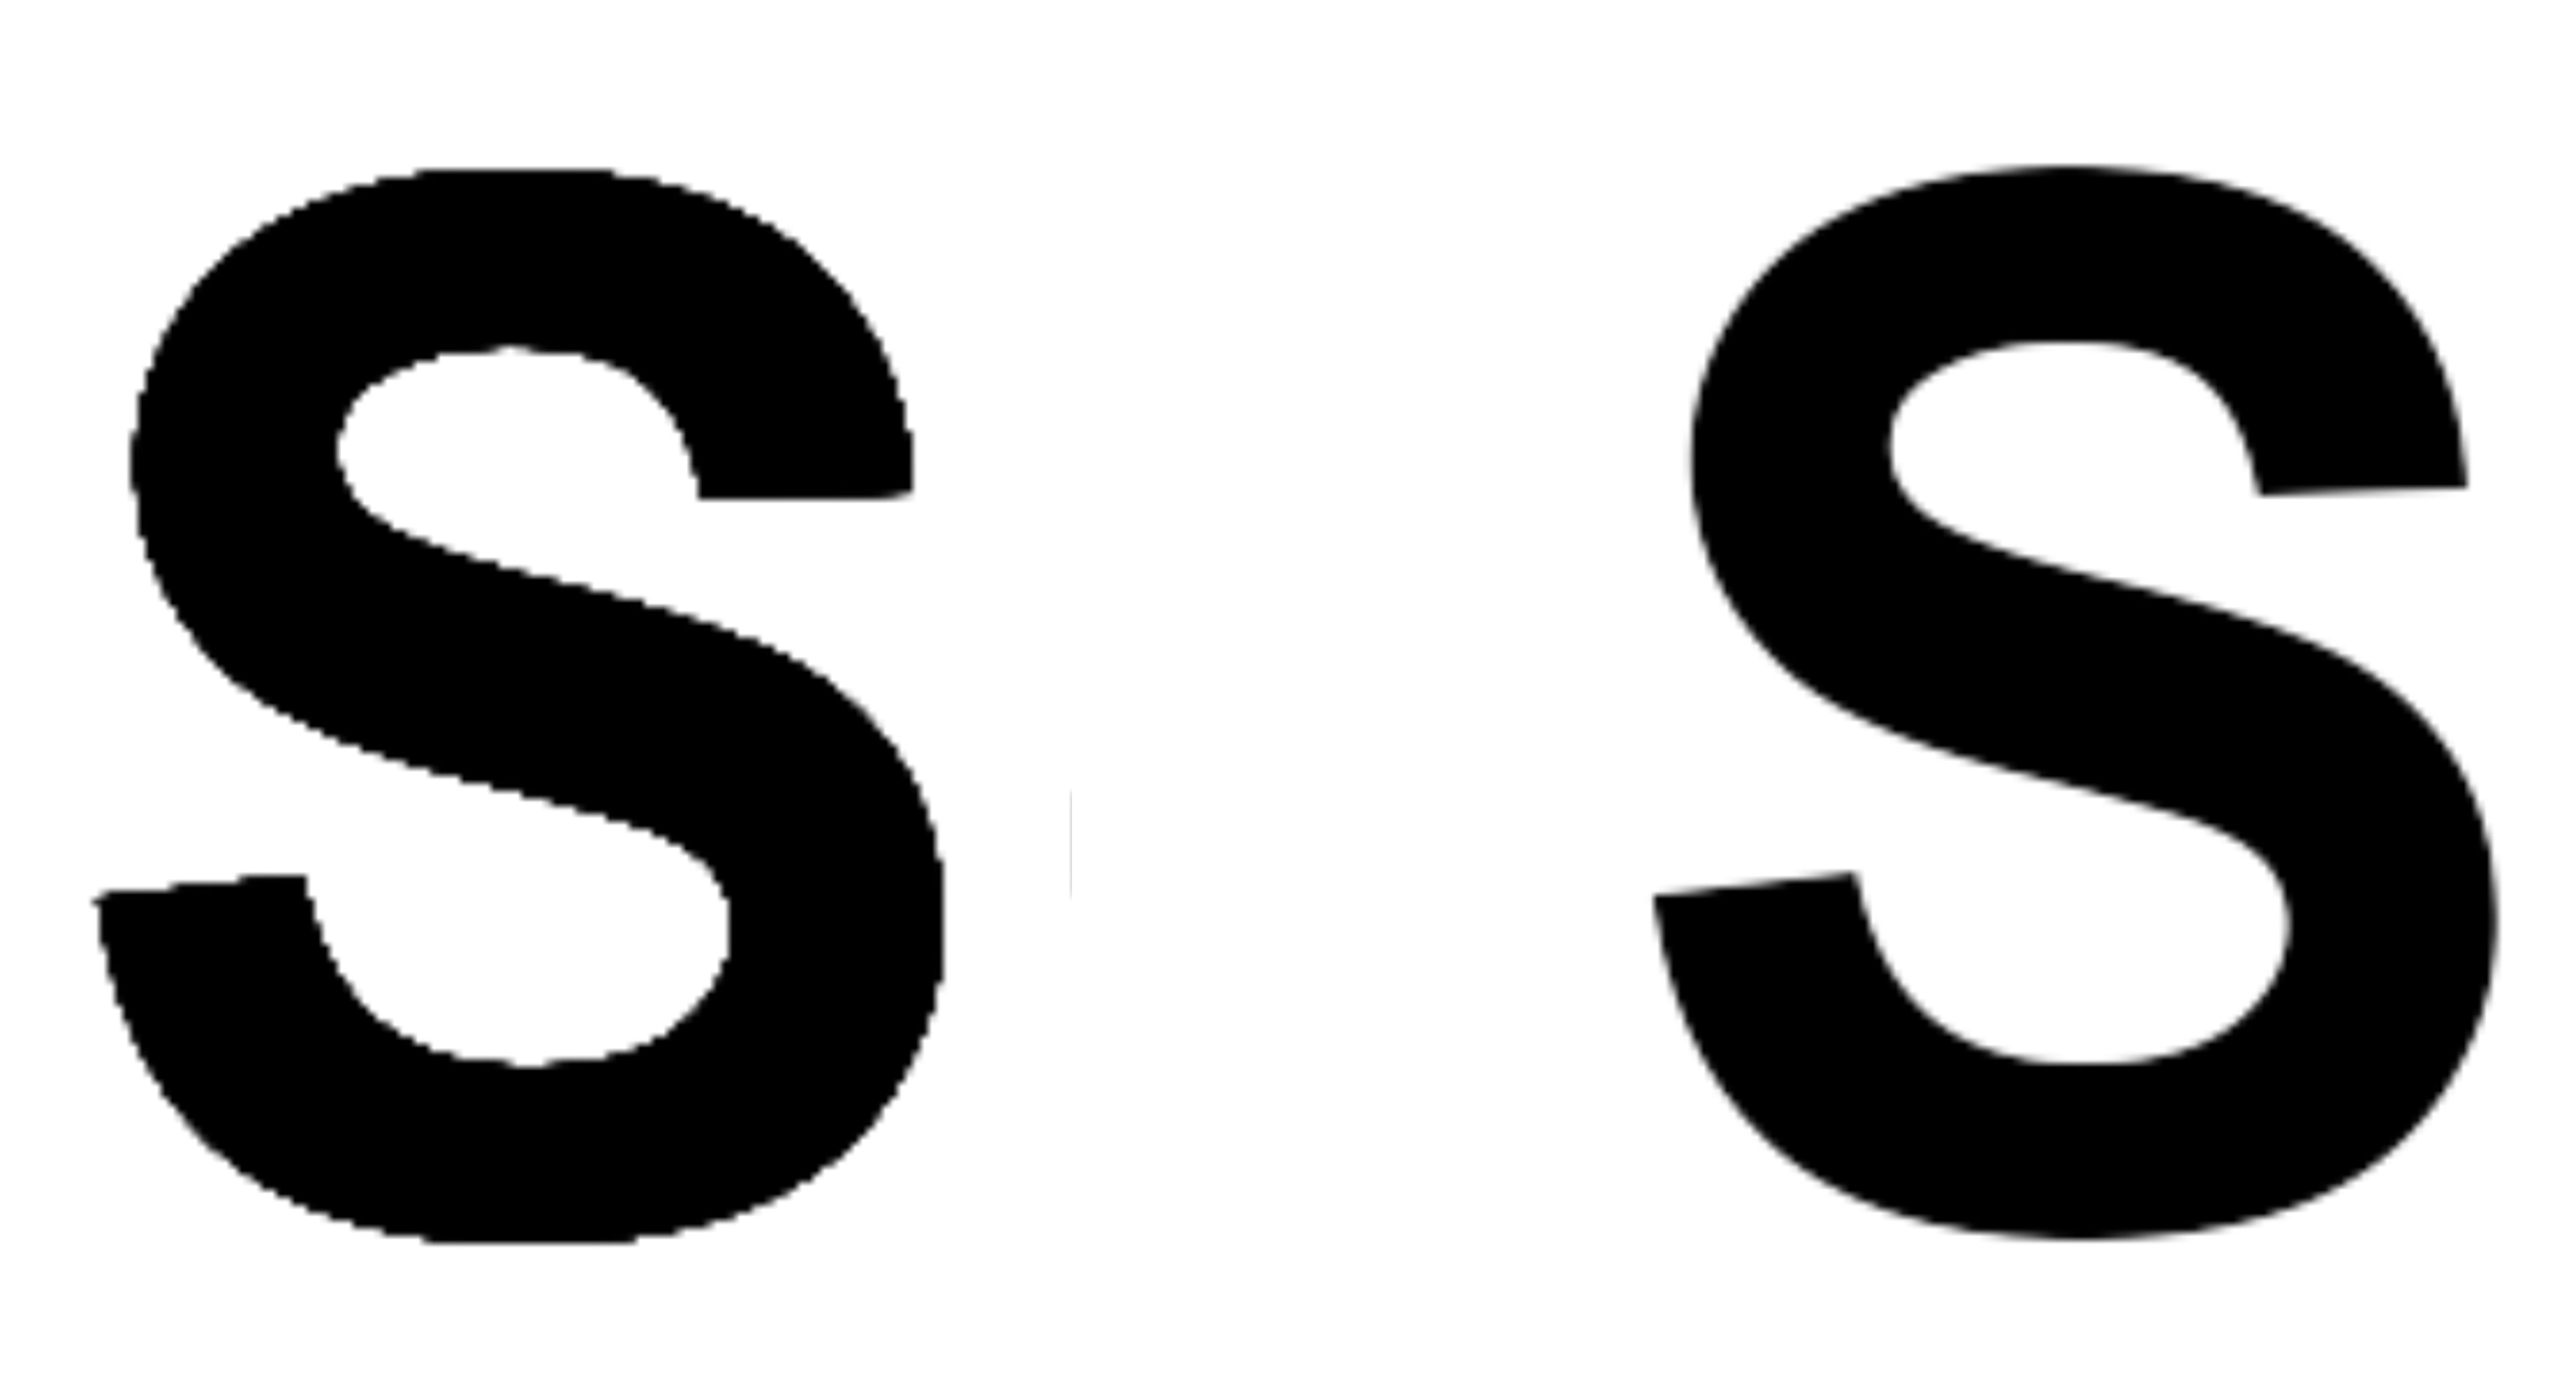 Zoomed in to the letter "S" from the two plots.